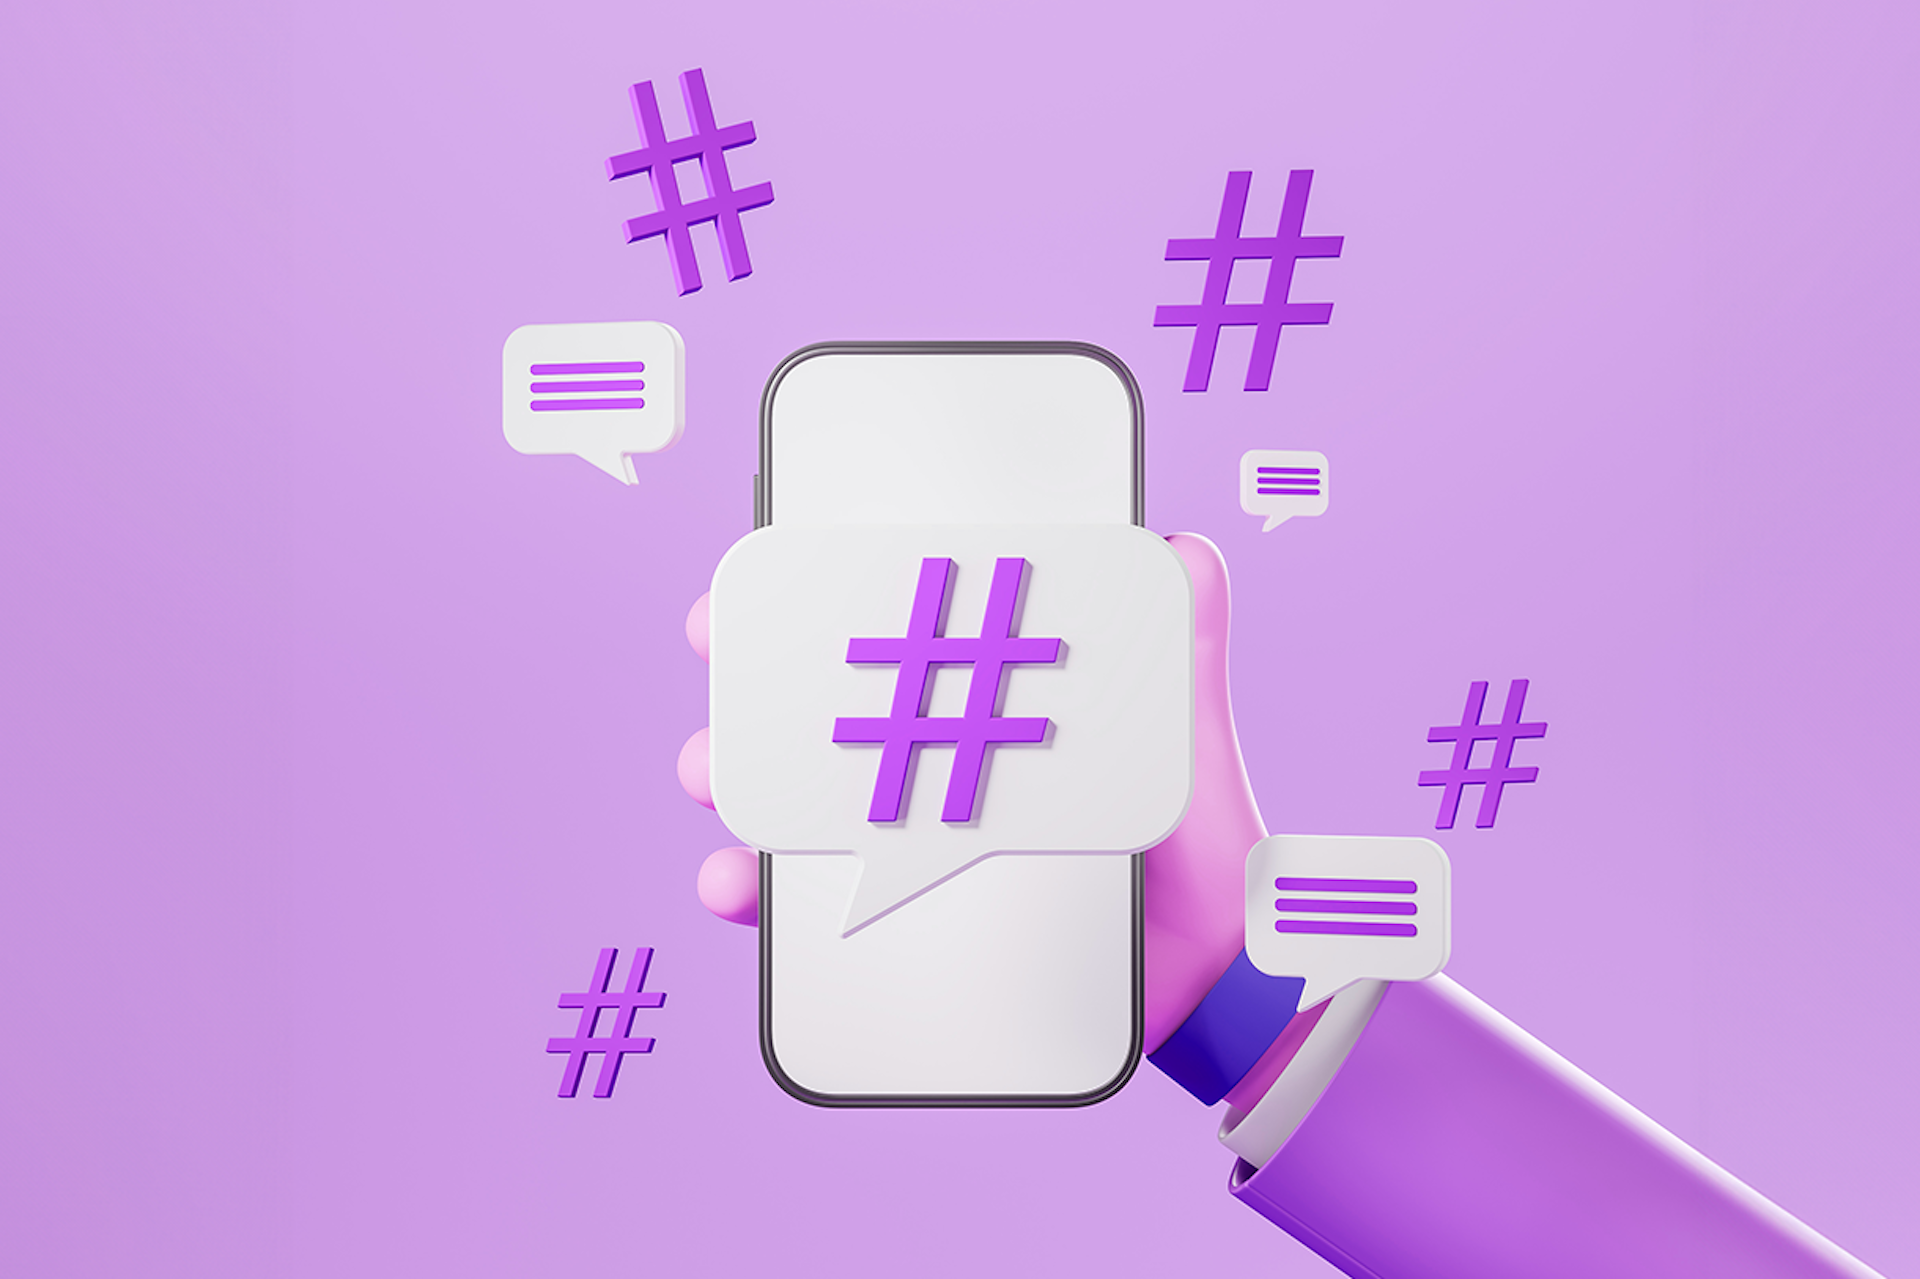 Image of a cartoon hand holding a phone, on a dark purple background. In front of the phone is a large hashtag symbol inside a speech bubble. The phone is surrounded by other hashtag symbols. Image for a blog post on how to use hashtags 